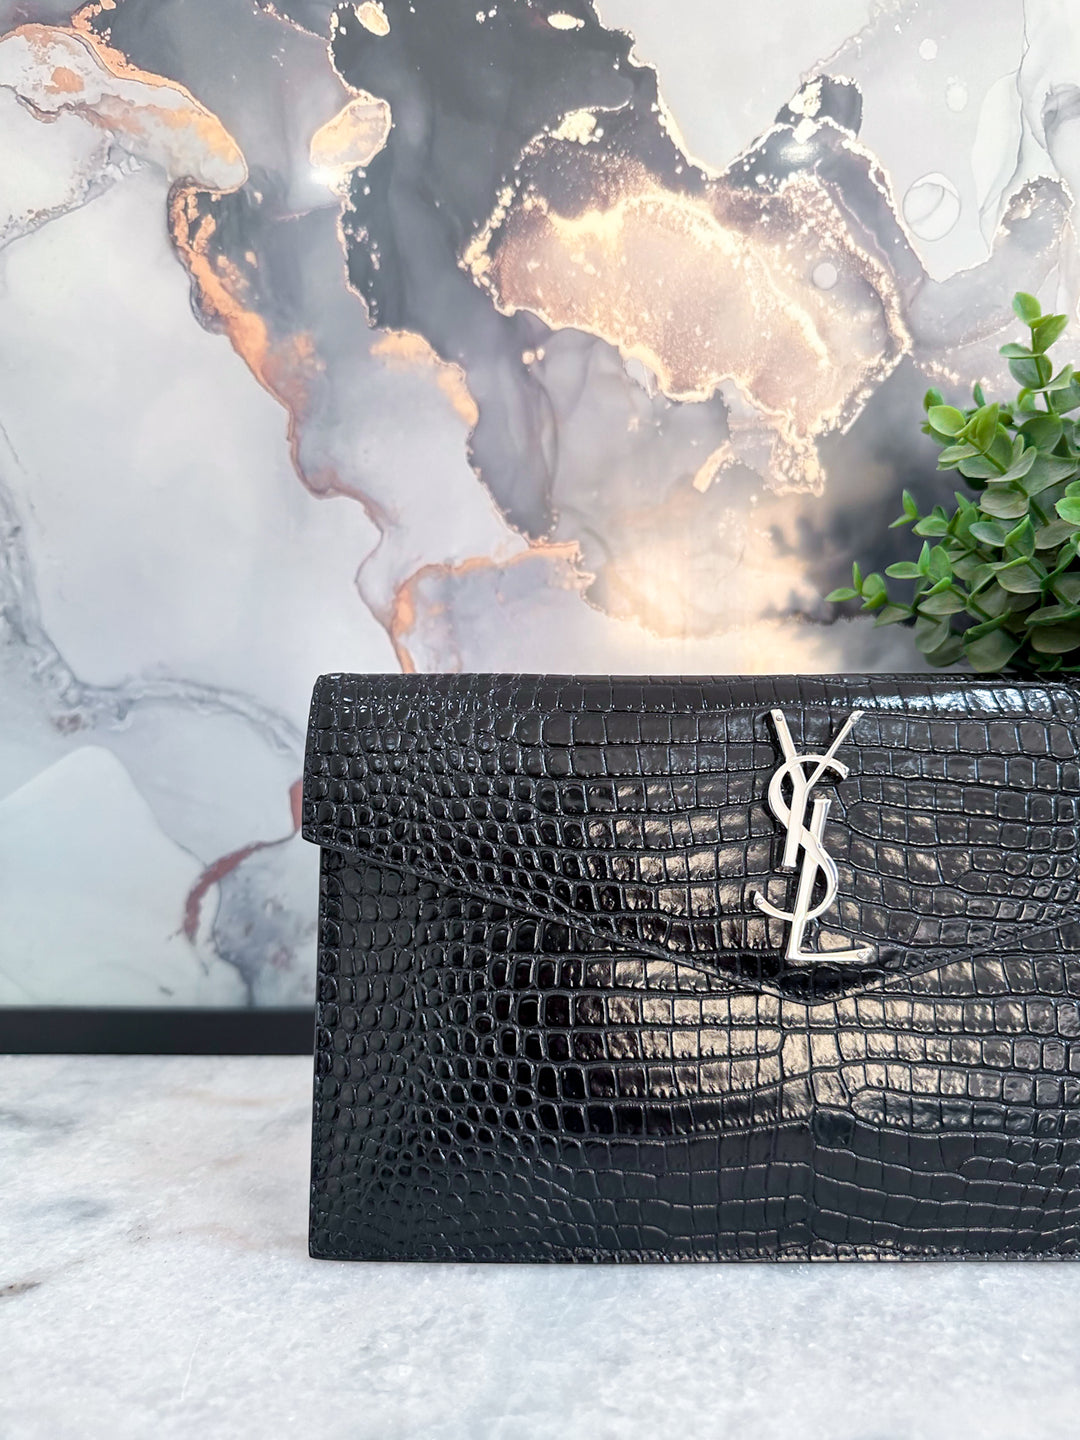 YSL UPTOWN POUCH BLACK CROC EMBOSSED LEATHER SILVER HARDWARE